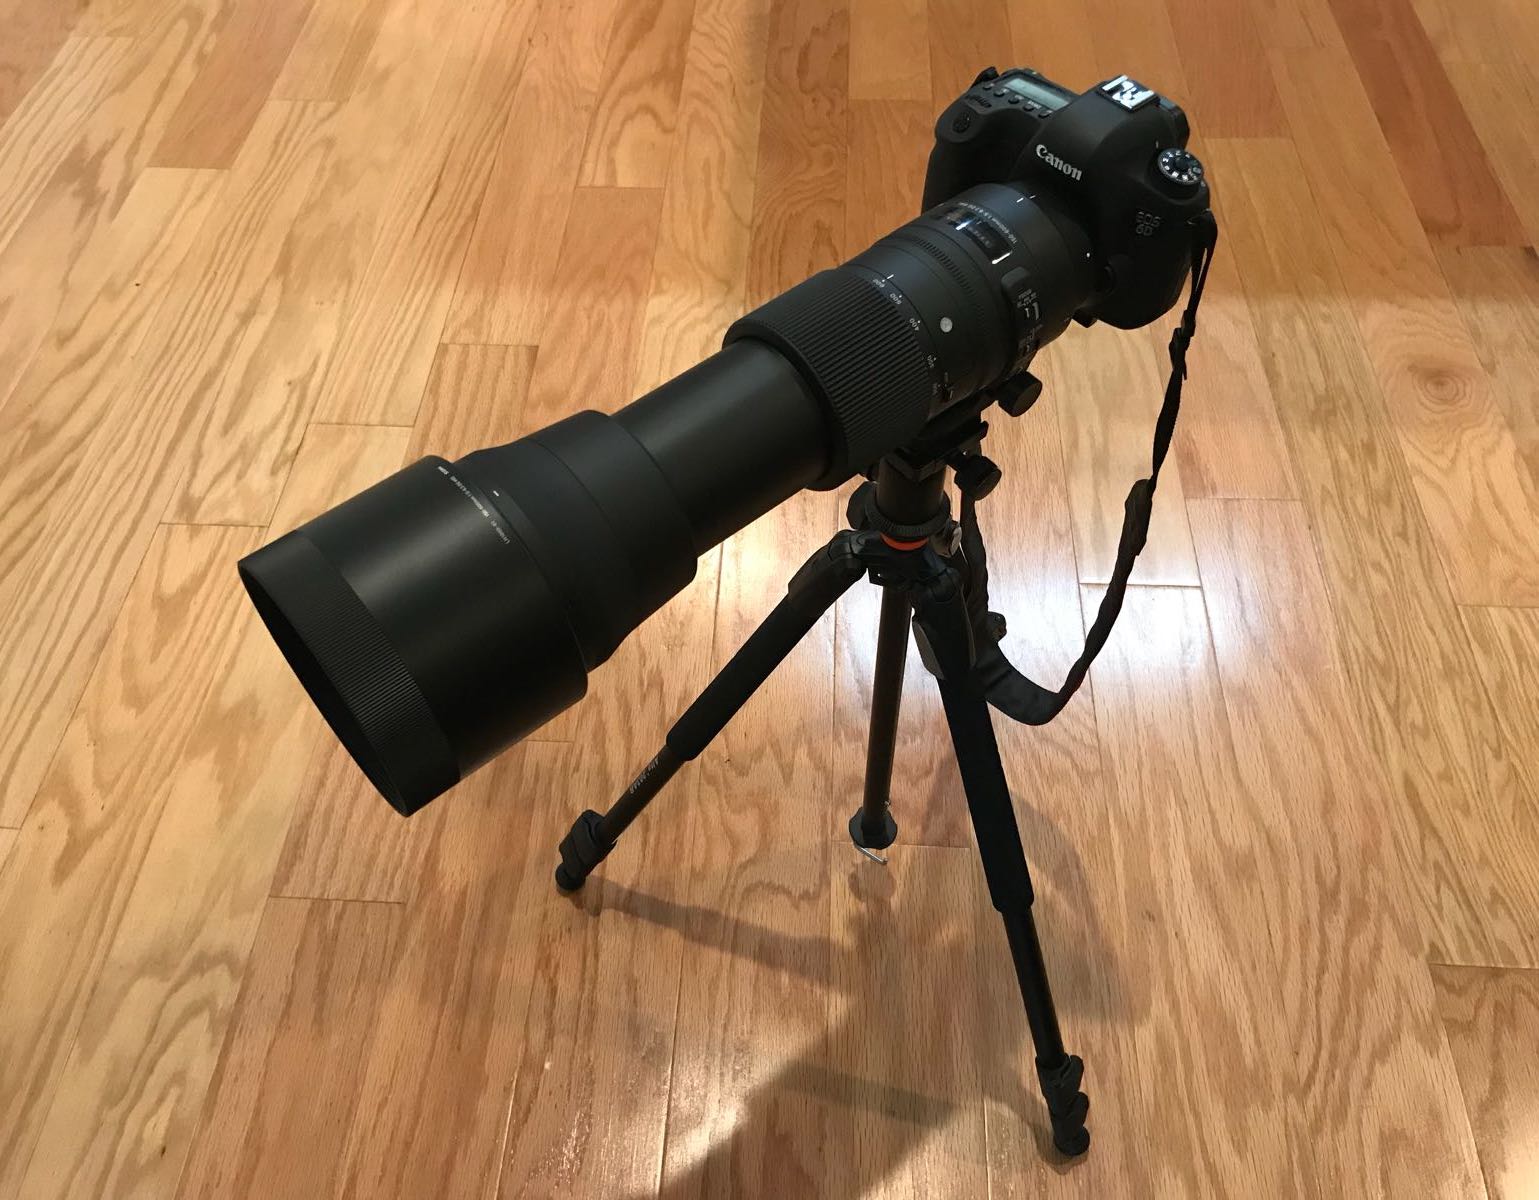 New addition to our camera gear, a telephoto lens - Sigma 150-600 mm f/5.0-6.3